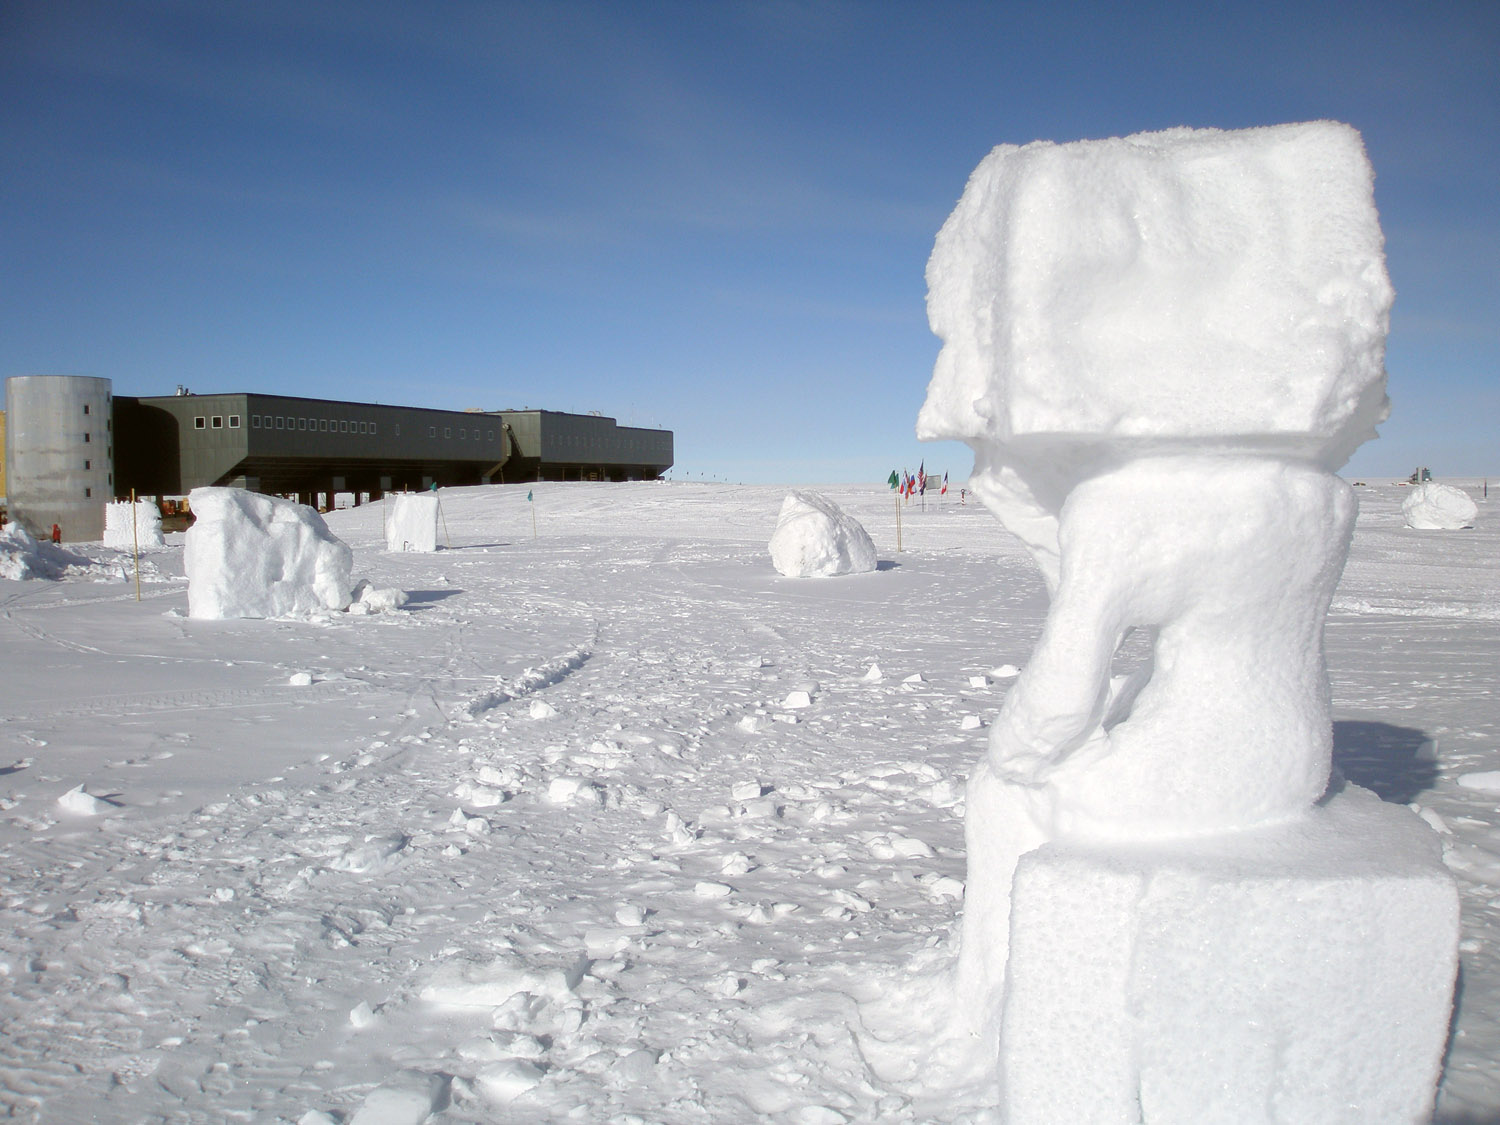 Snow Sculptures at the South Pole - 2